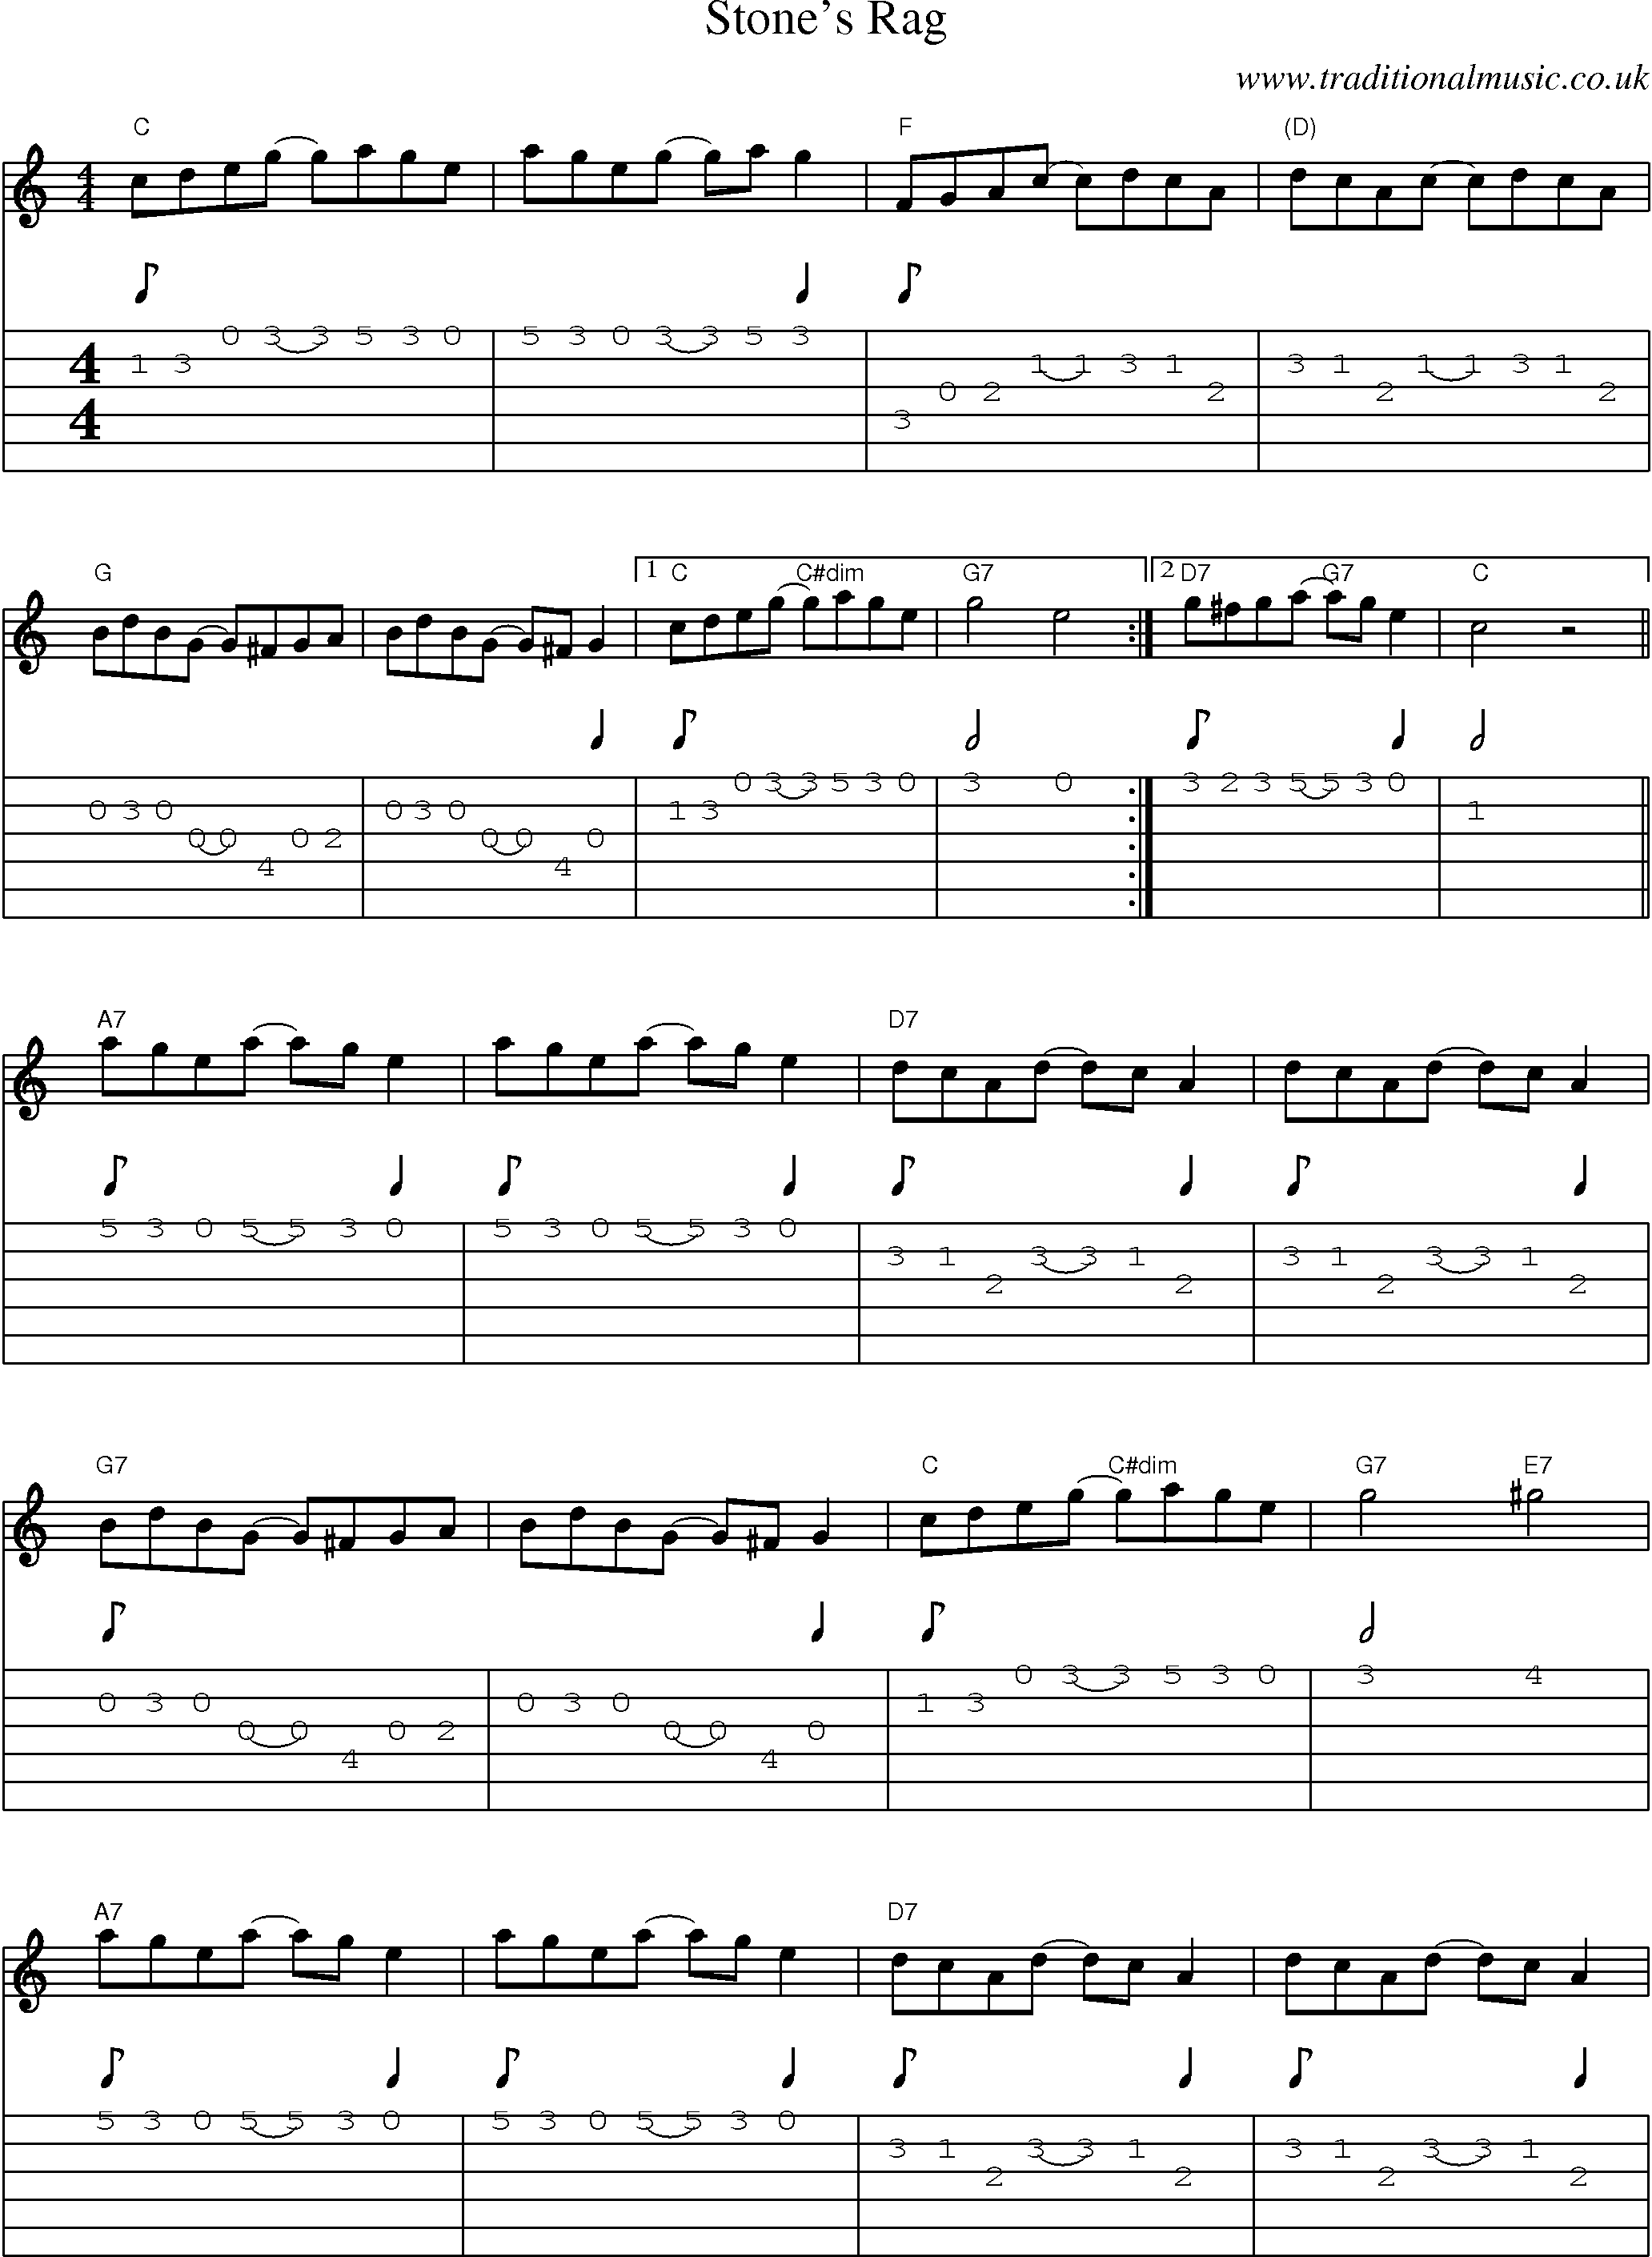 Music Score and Guitar Tabs for Stones Rag